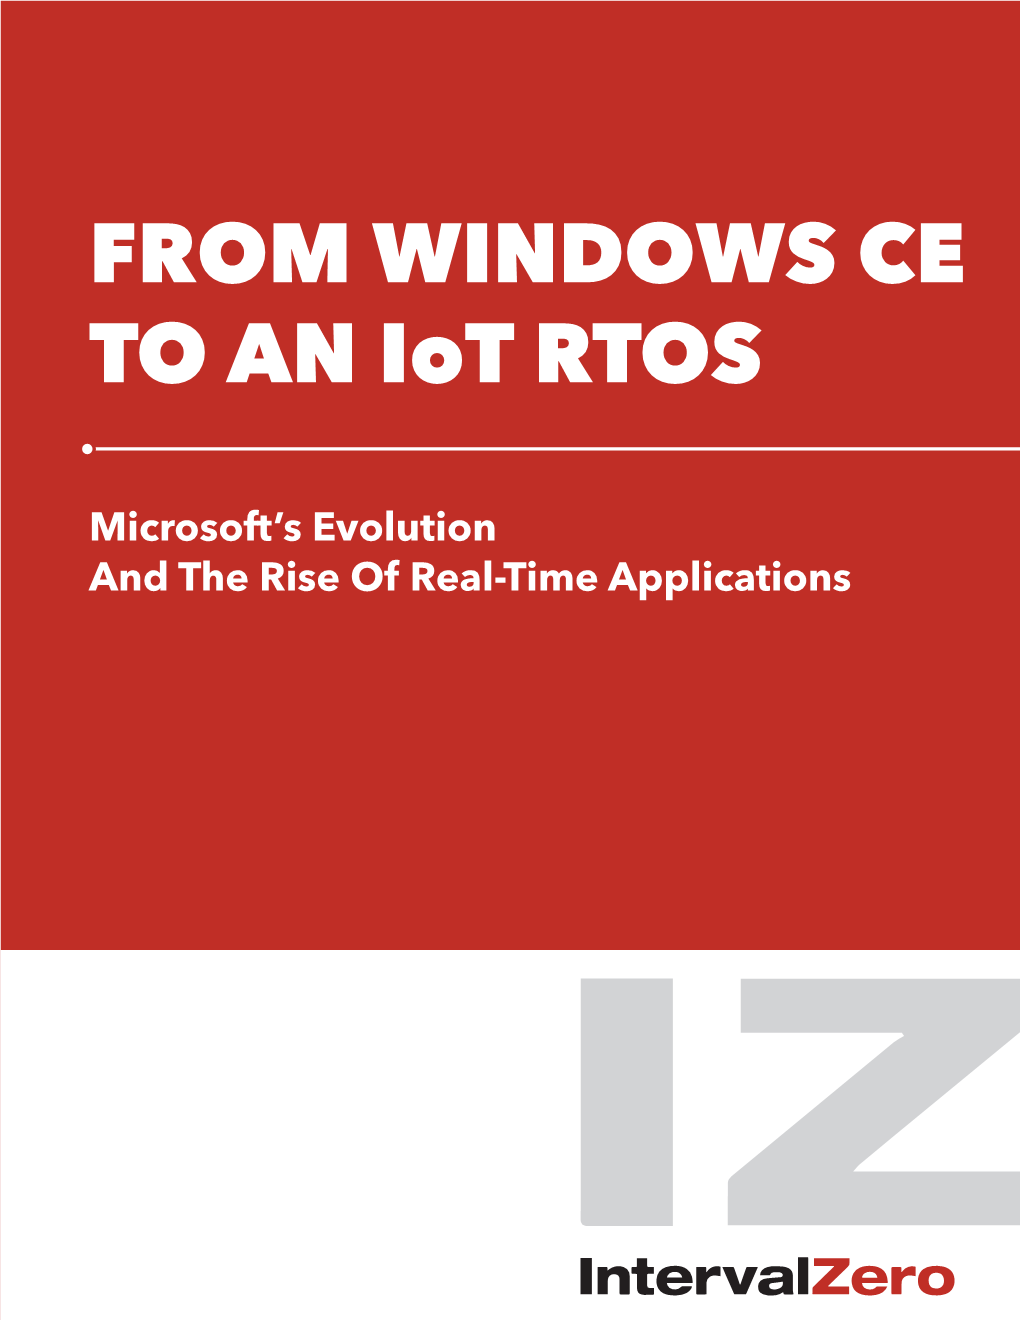 FROM WINDOWS CE to an Iot RTOS